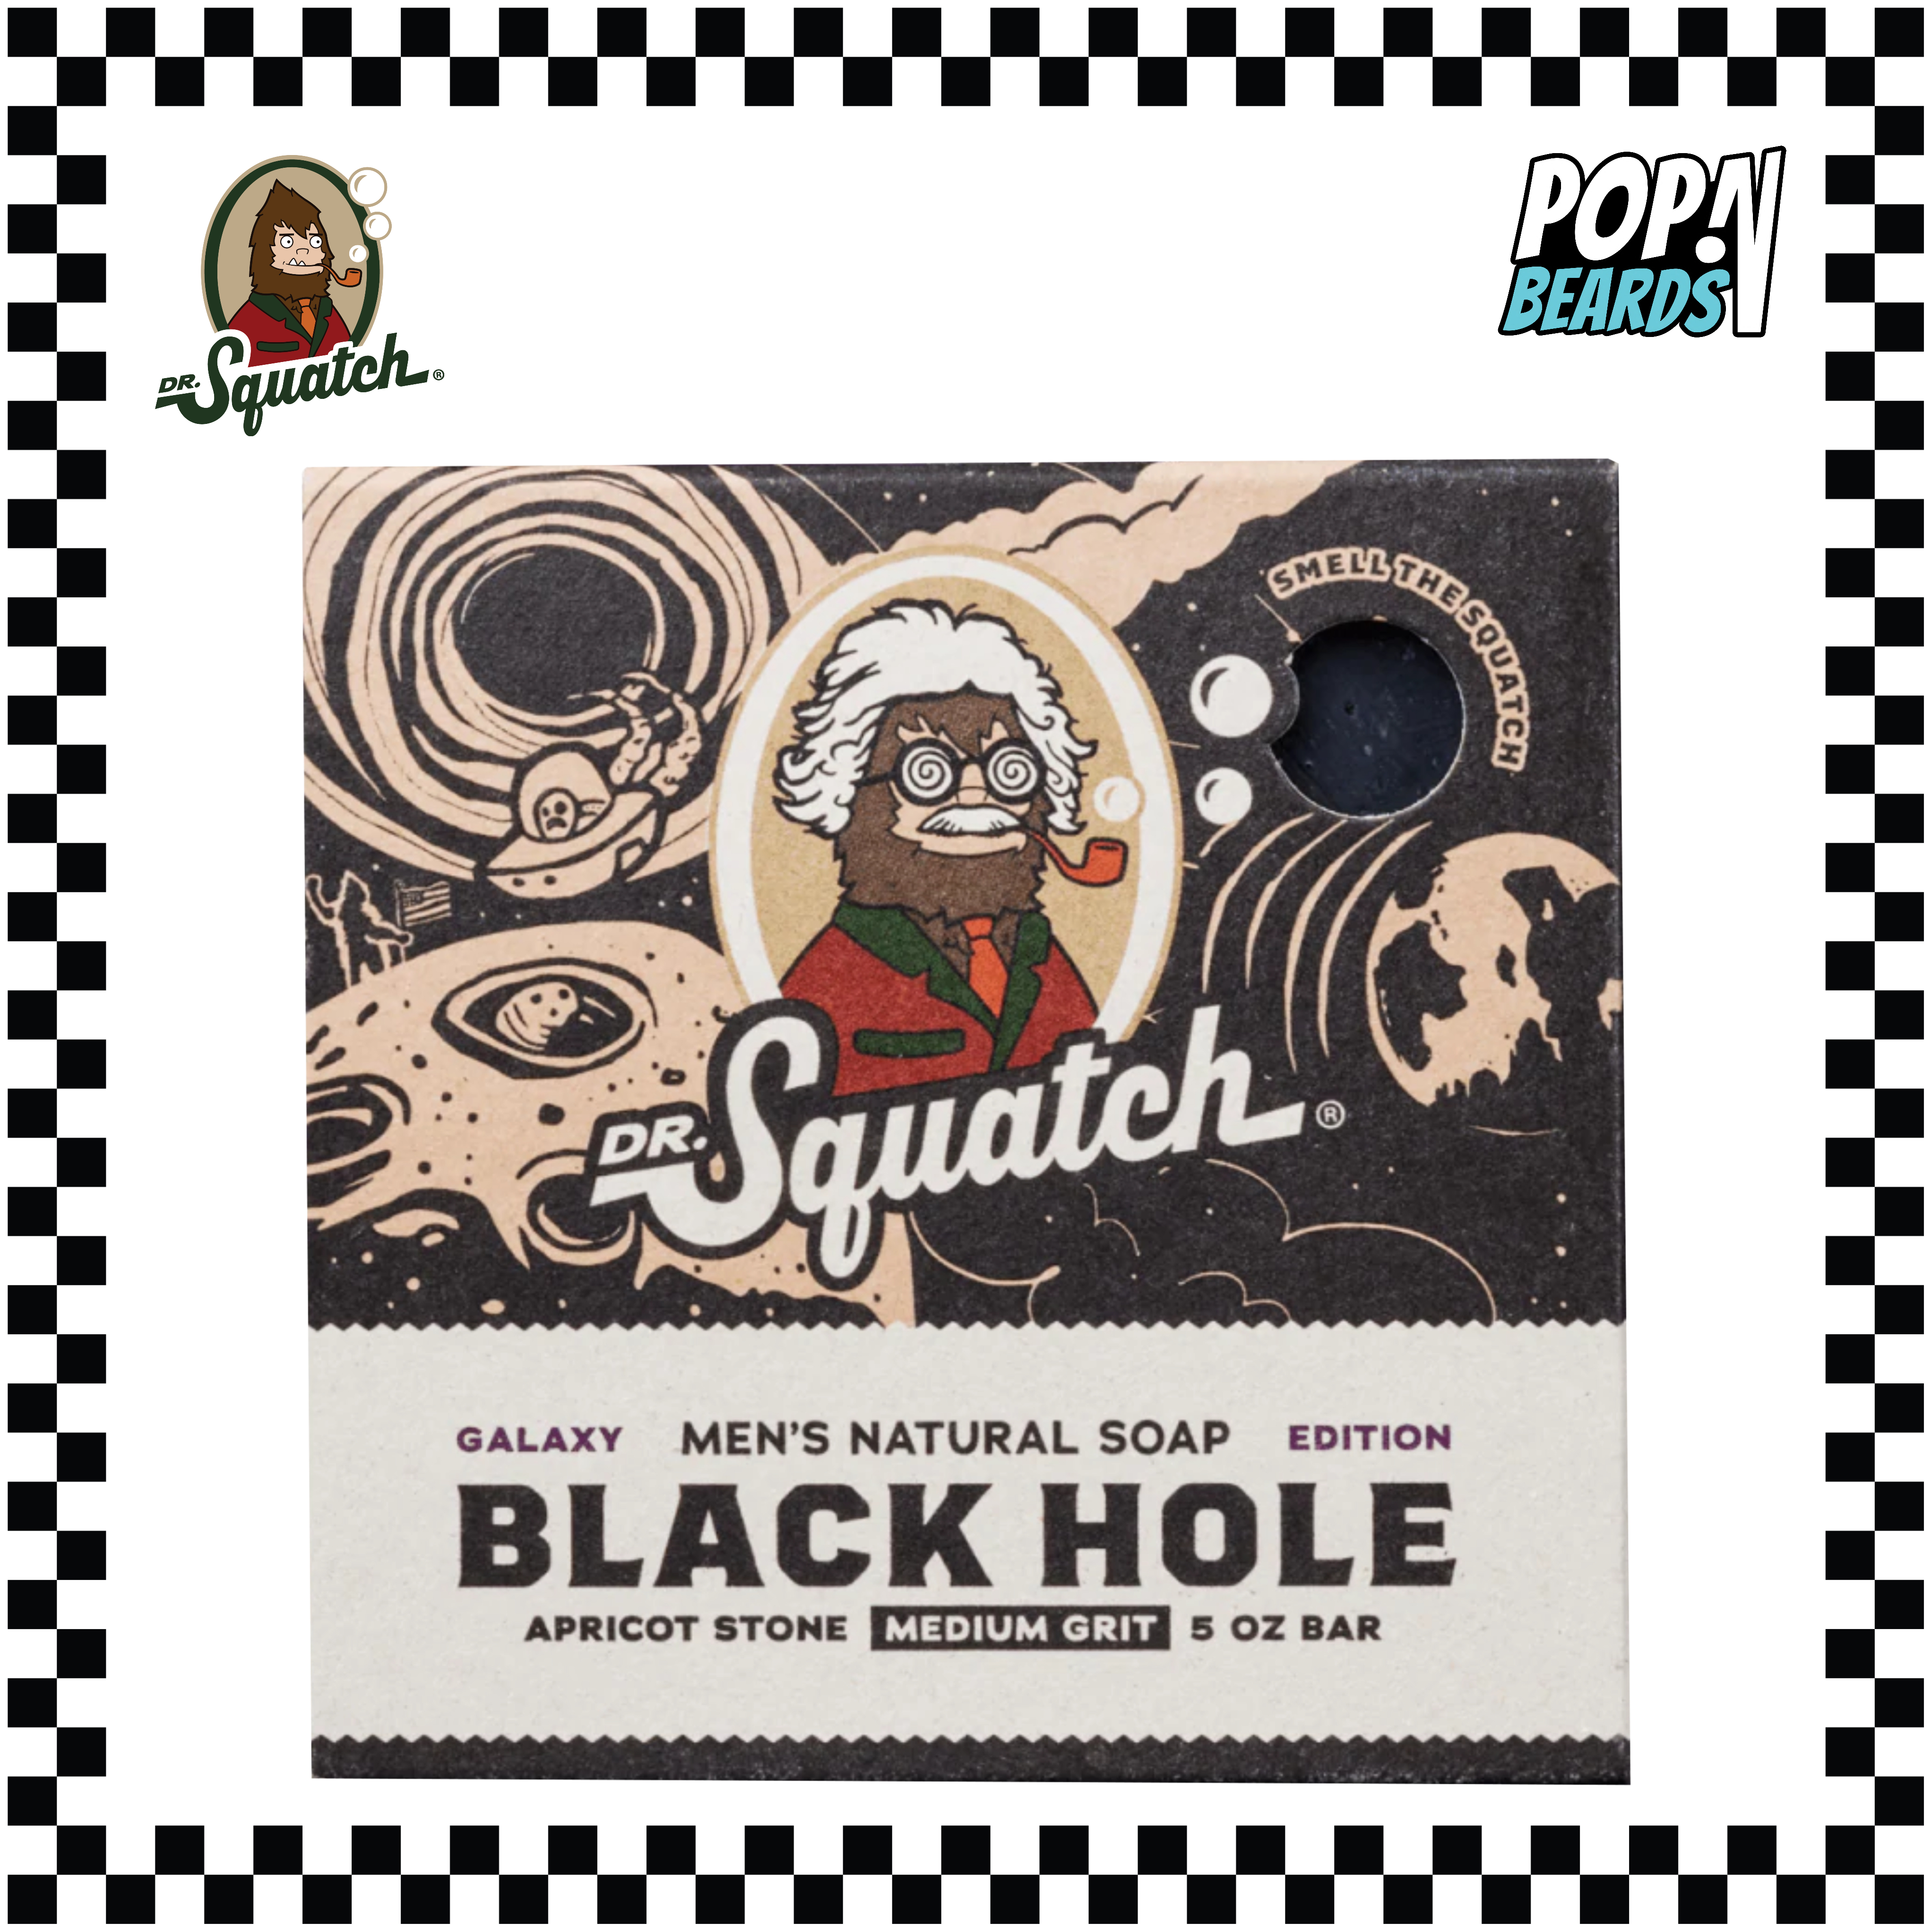 Dr. Squatch Launches Black Hole Bar Soap In Light Of Recently